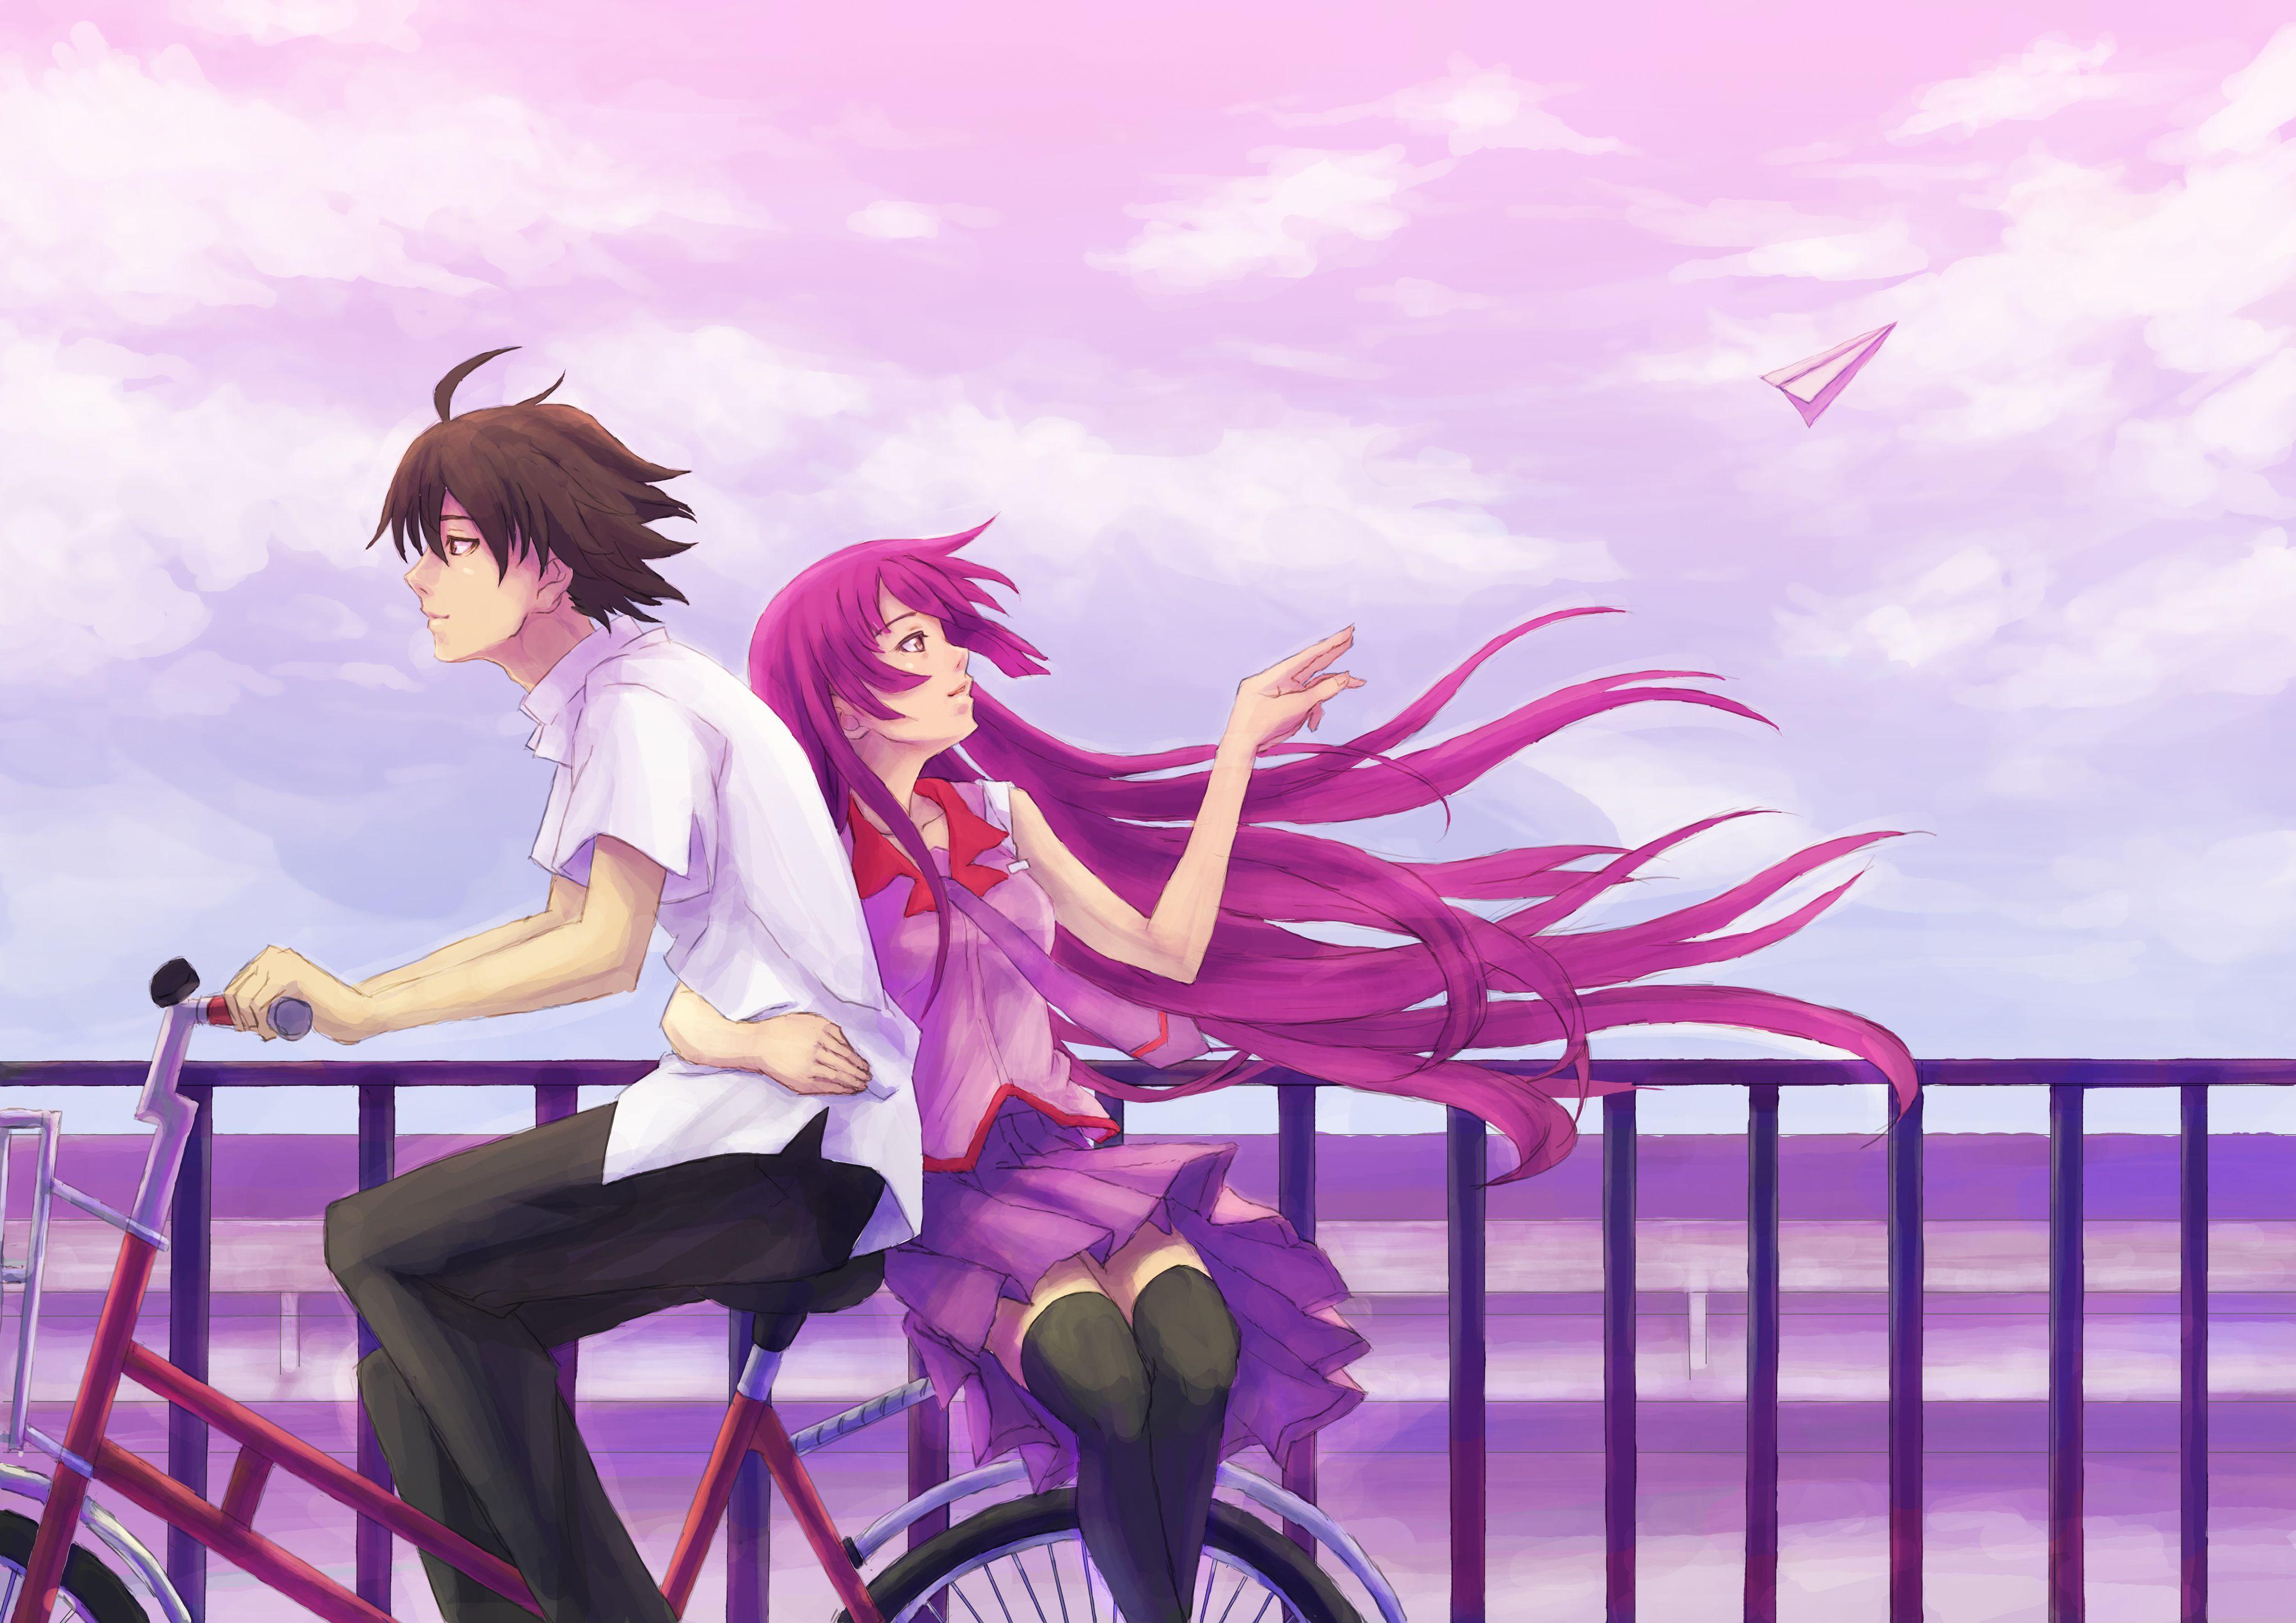 Anime Boy and Girl Wallpaper Free Anime Boy and Girl Background